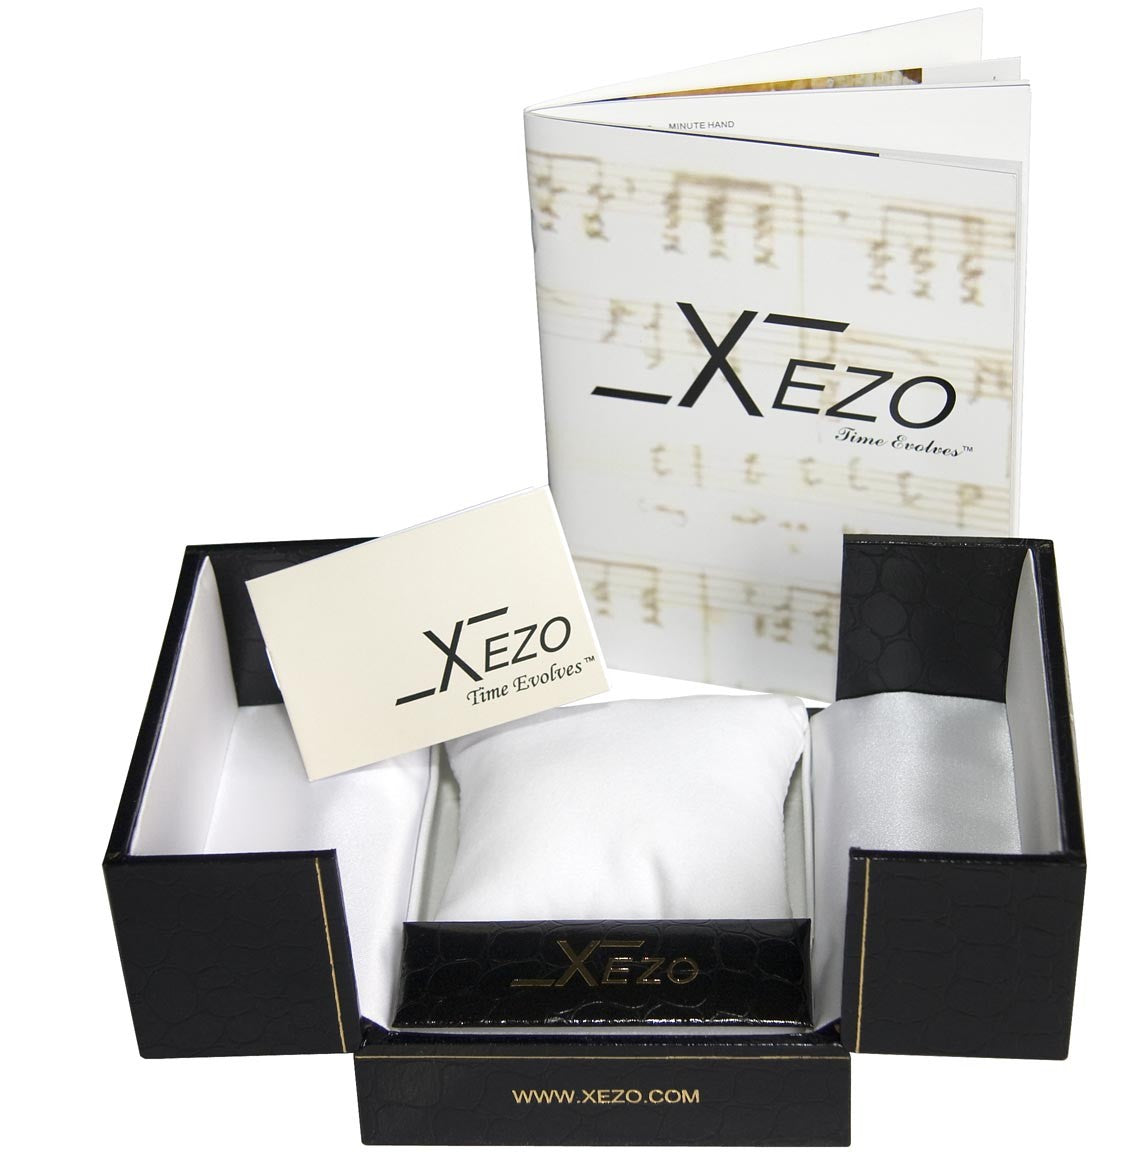 Xezo - Black gift box, certificate, and manual of the Architect 2001 LS. Ladies watch